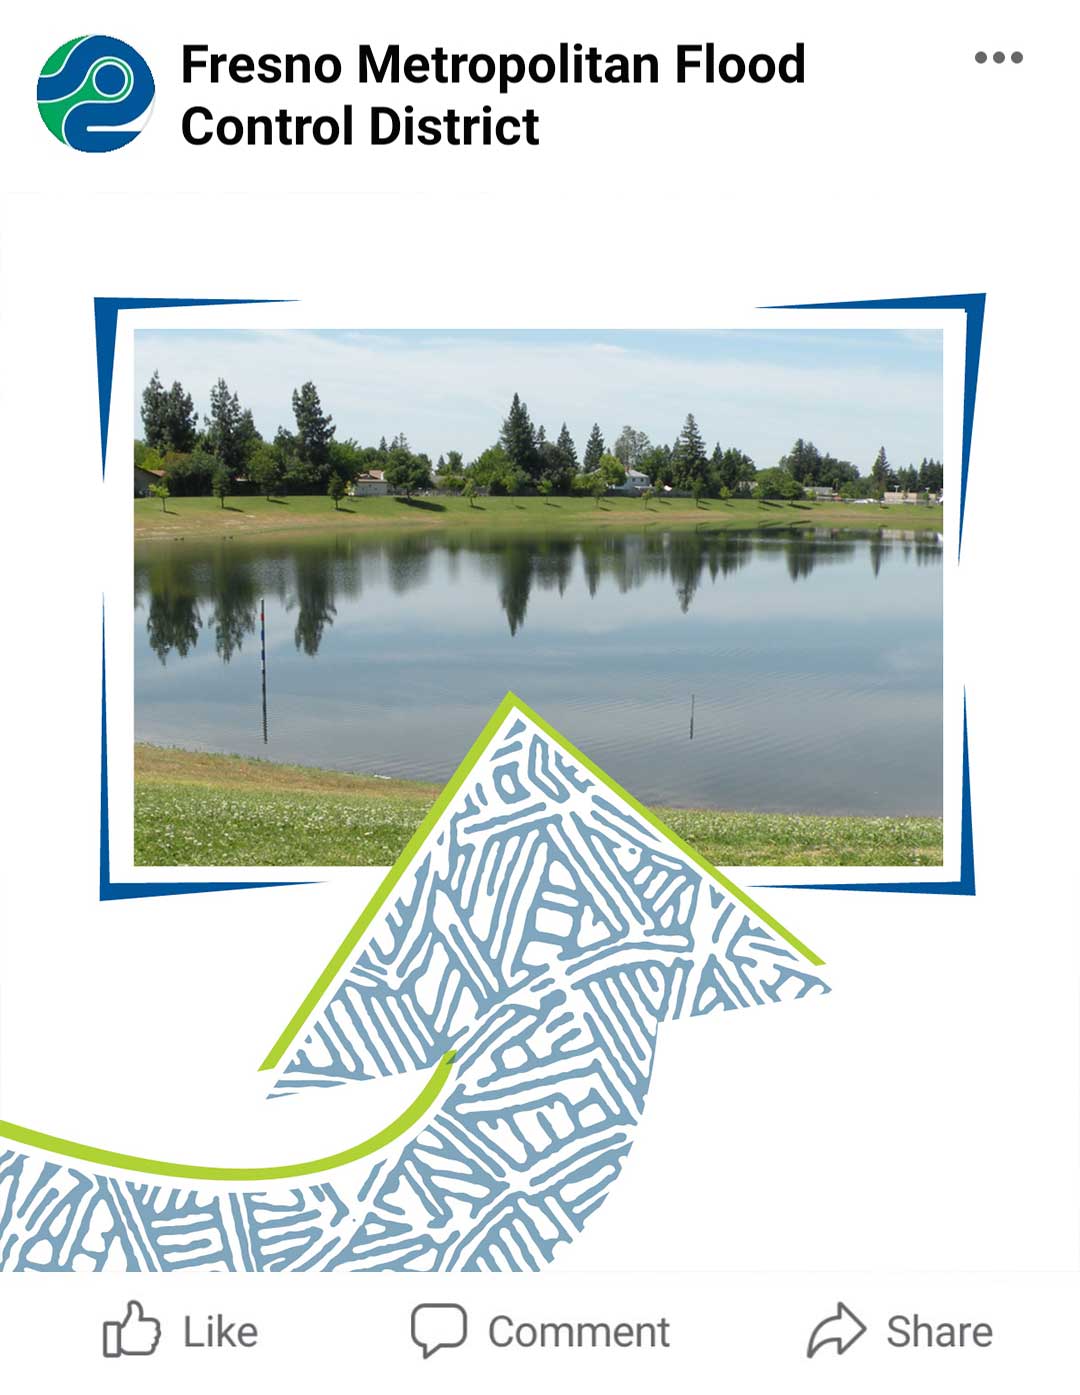 Graphic by the Fresno Metropolitan Flood Control District with an arrow pointed right and angling up into a photo of a Fresno-area ponding basin